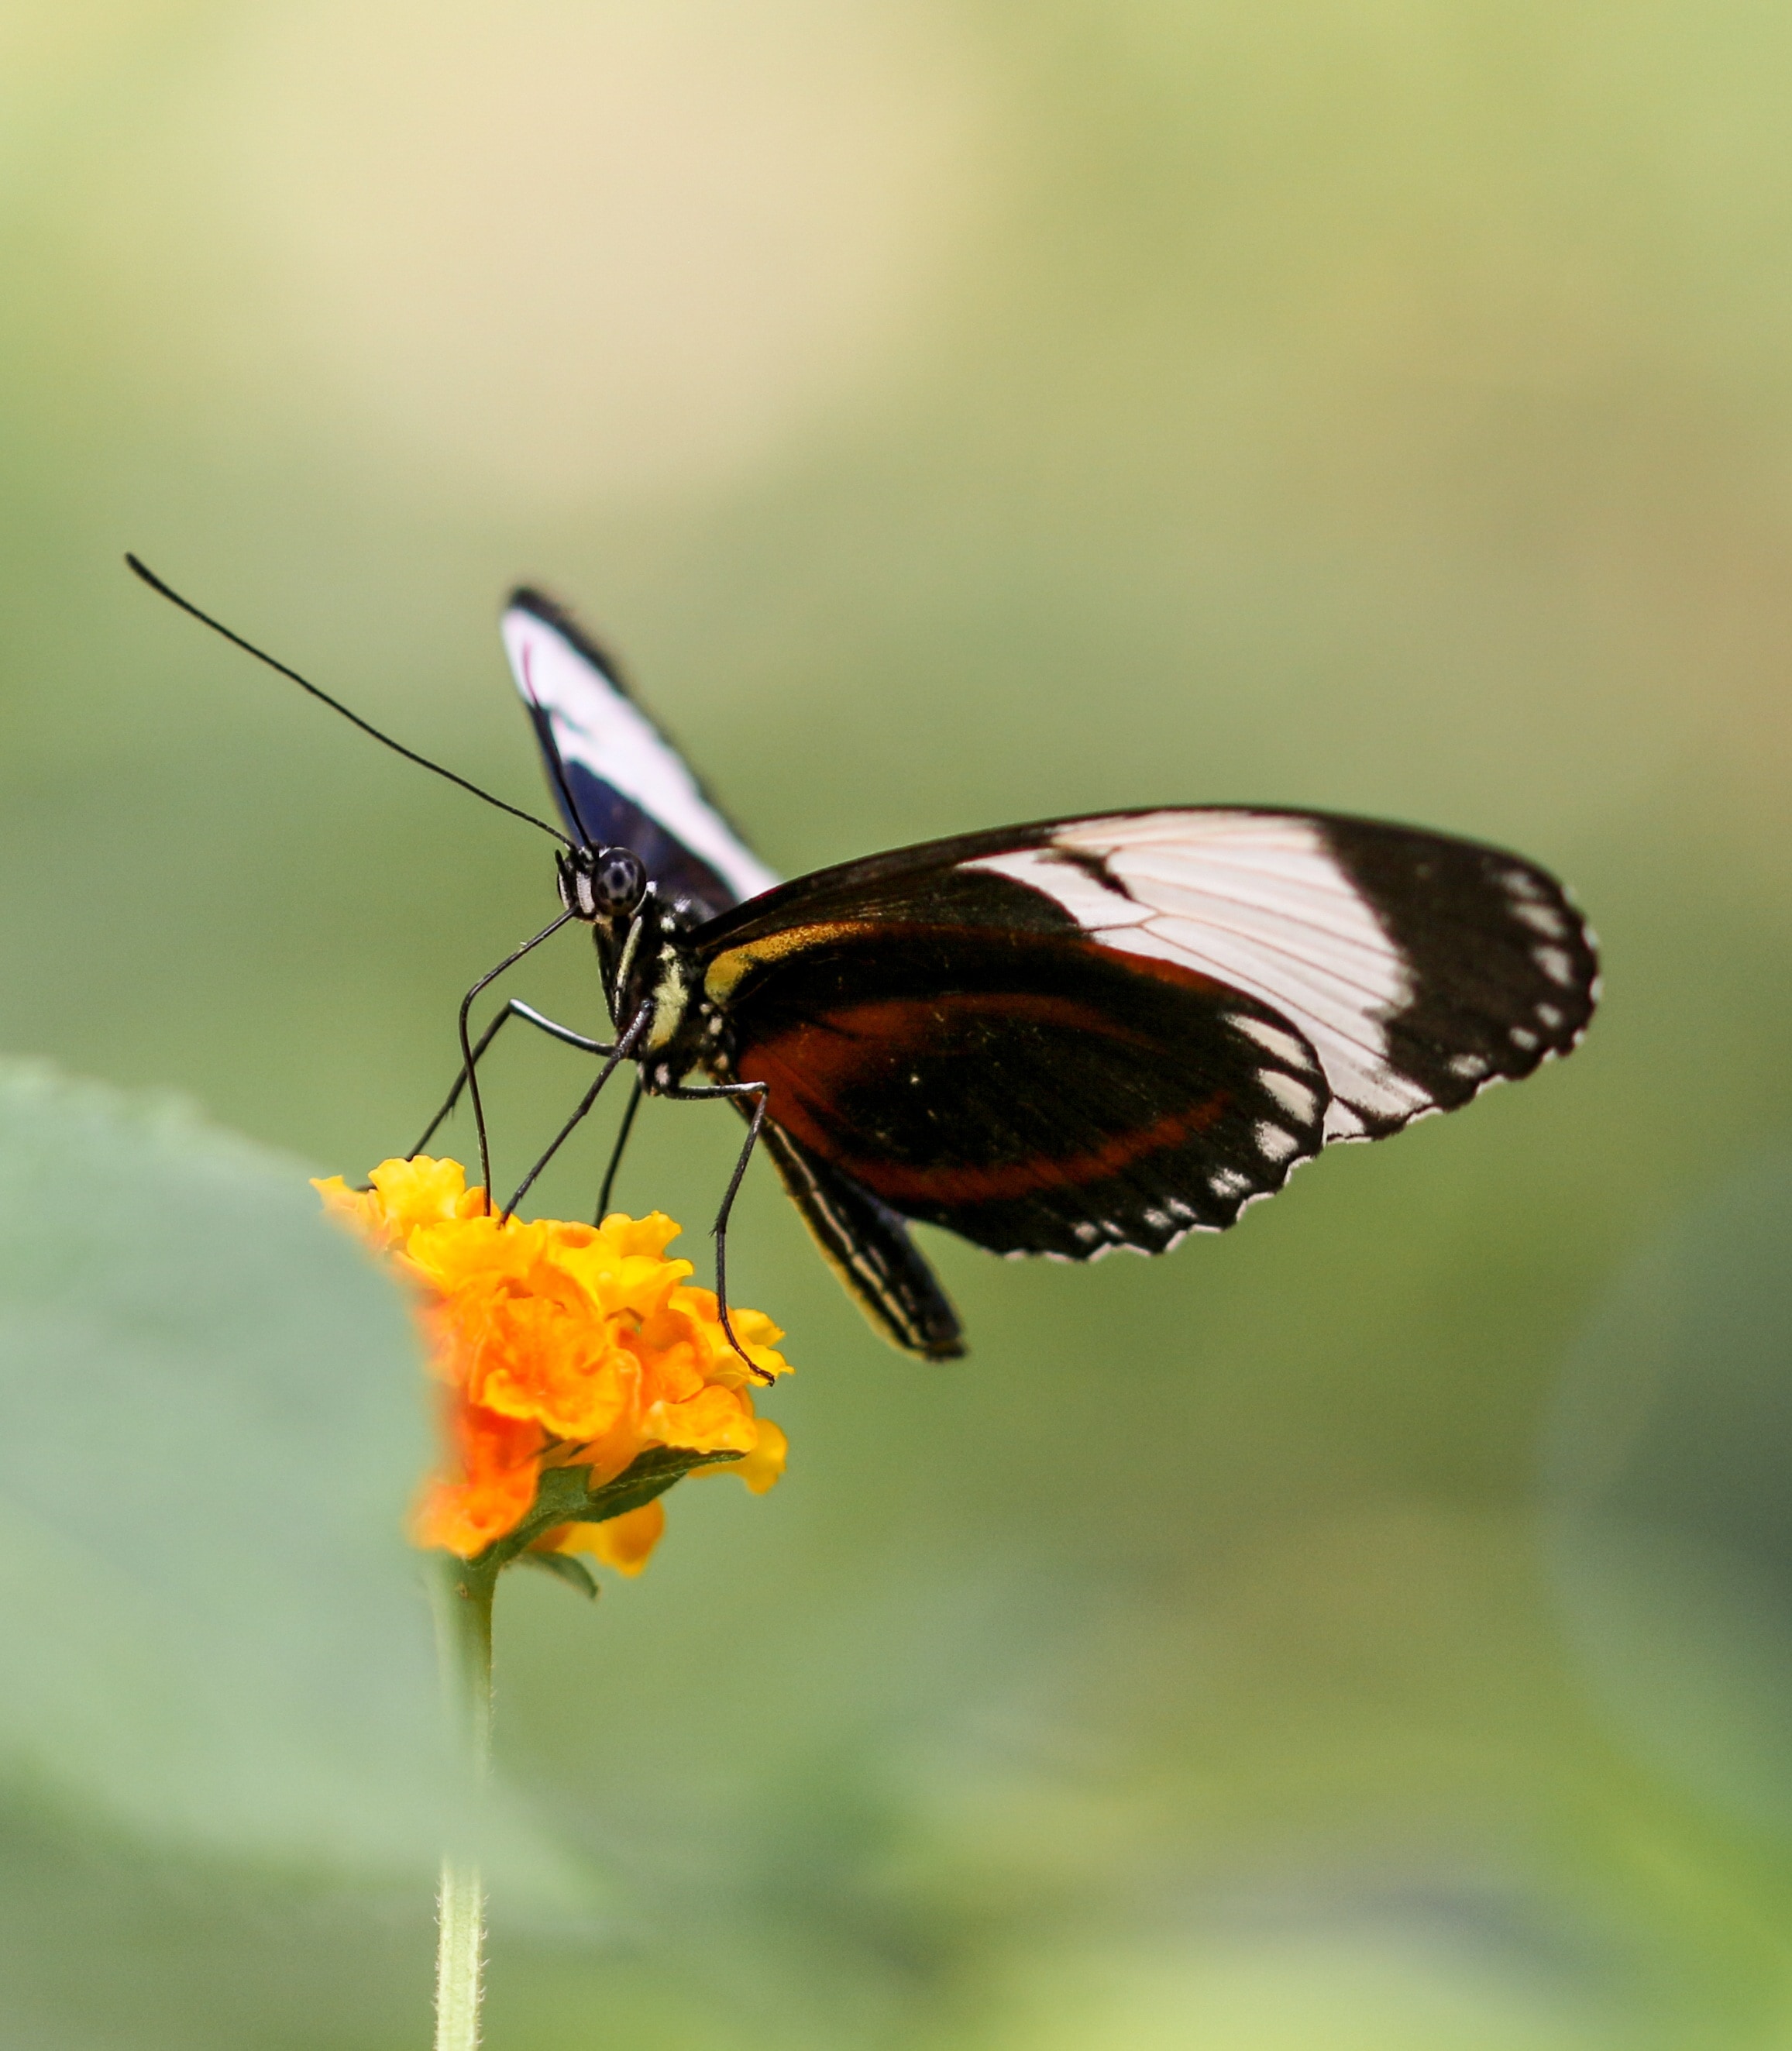 Probe, Insect, Butterfly, Fly, Wing, flower, insect